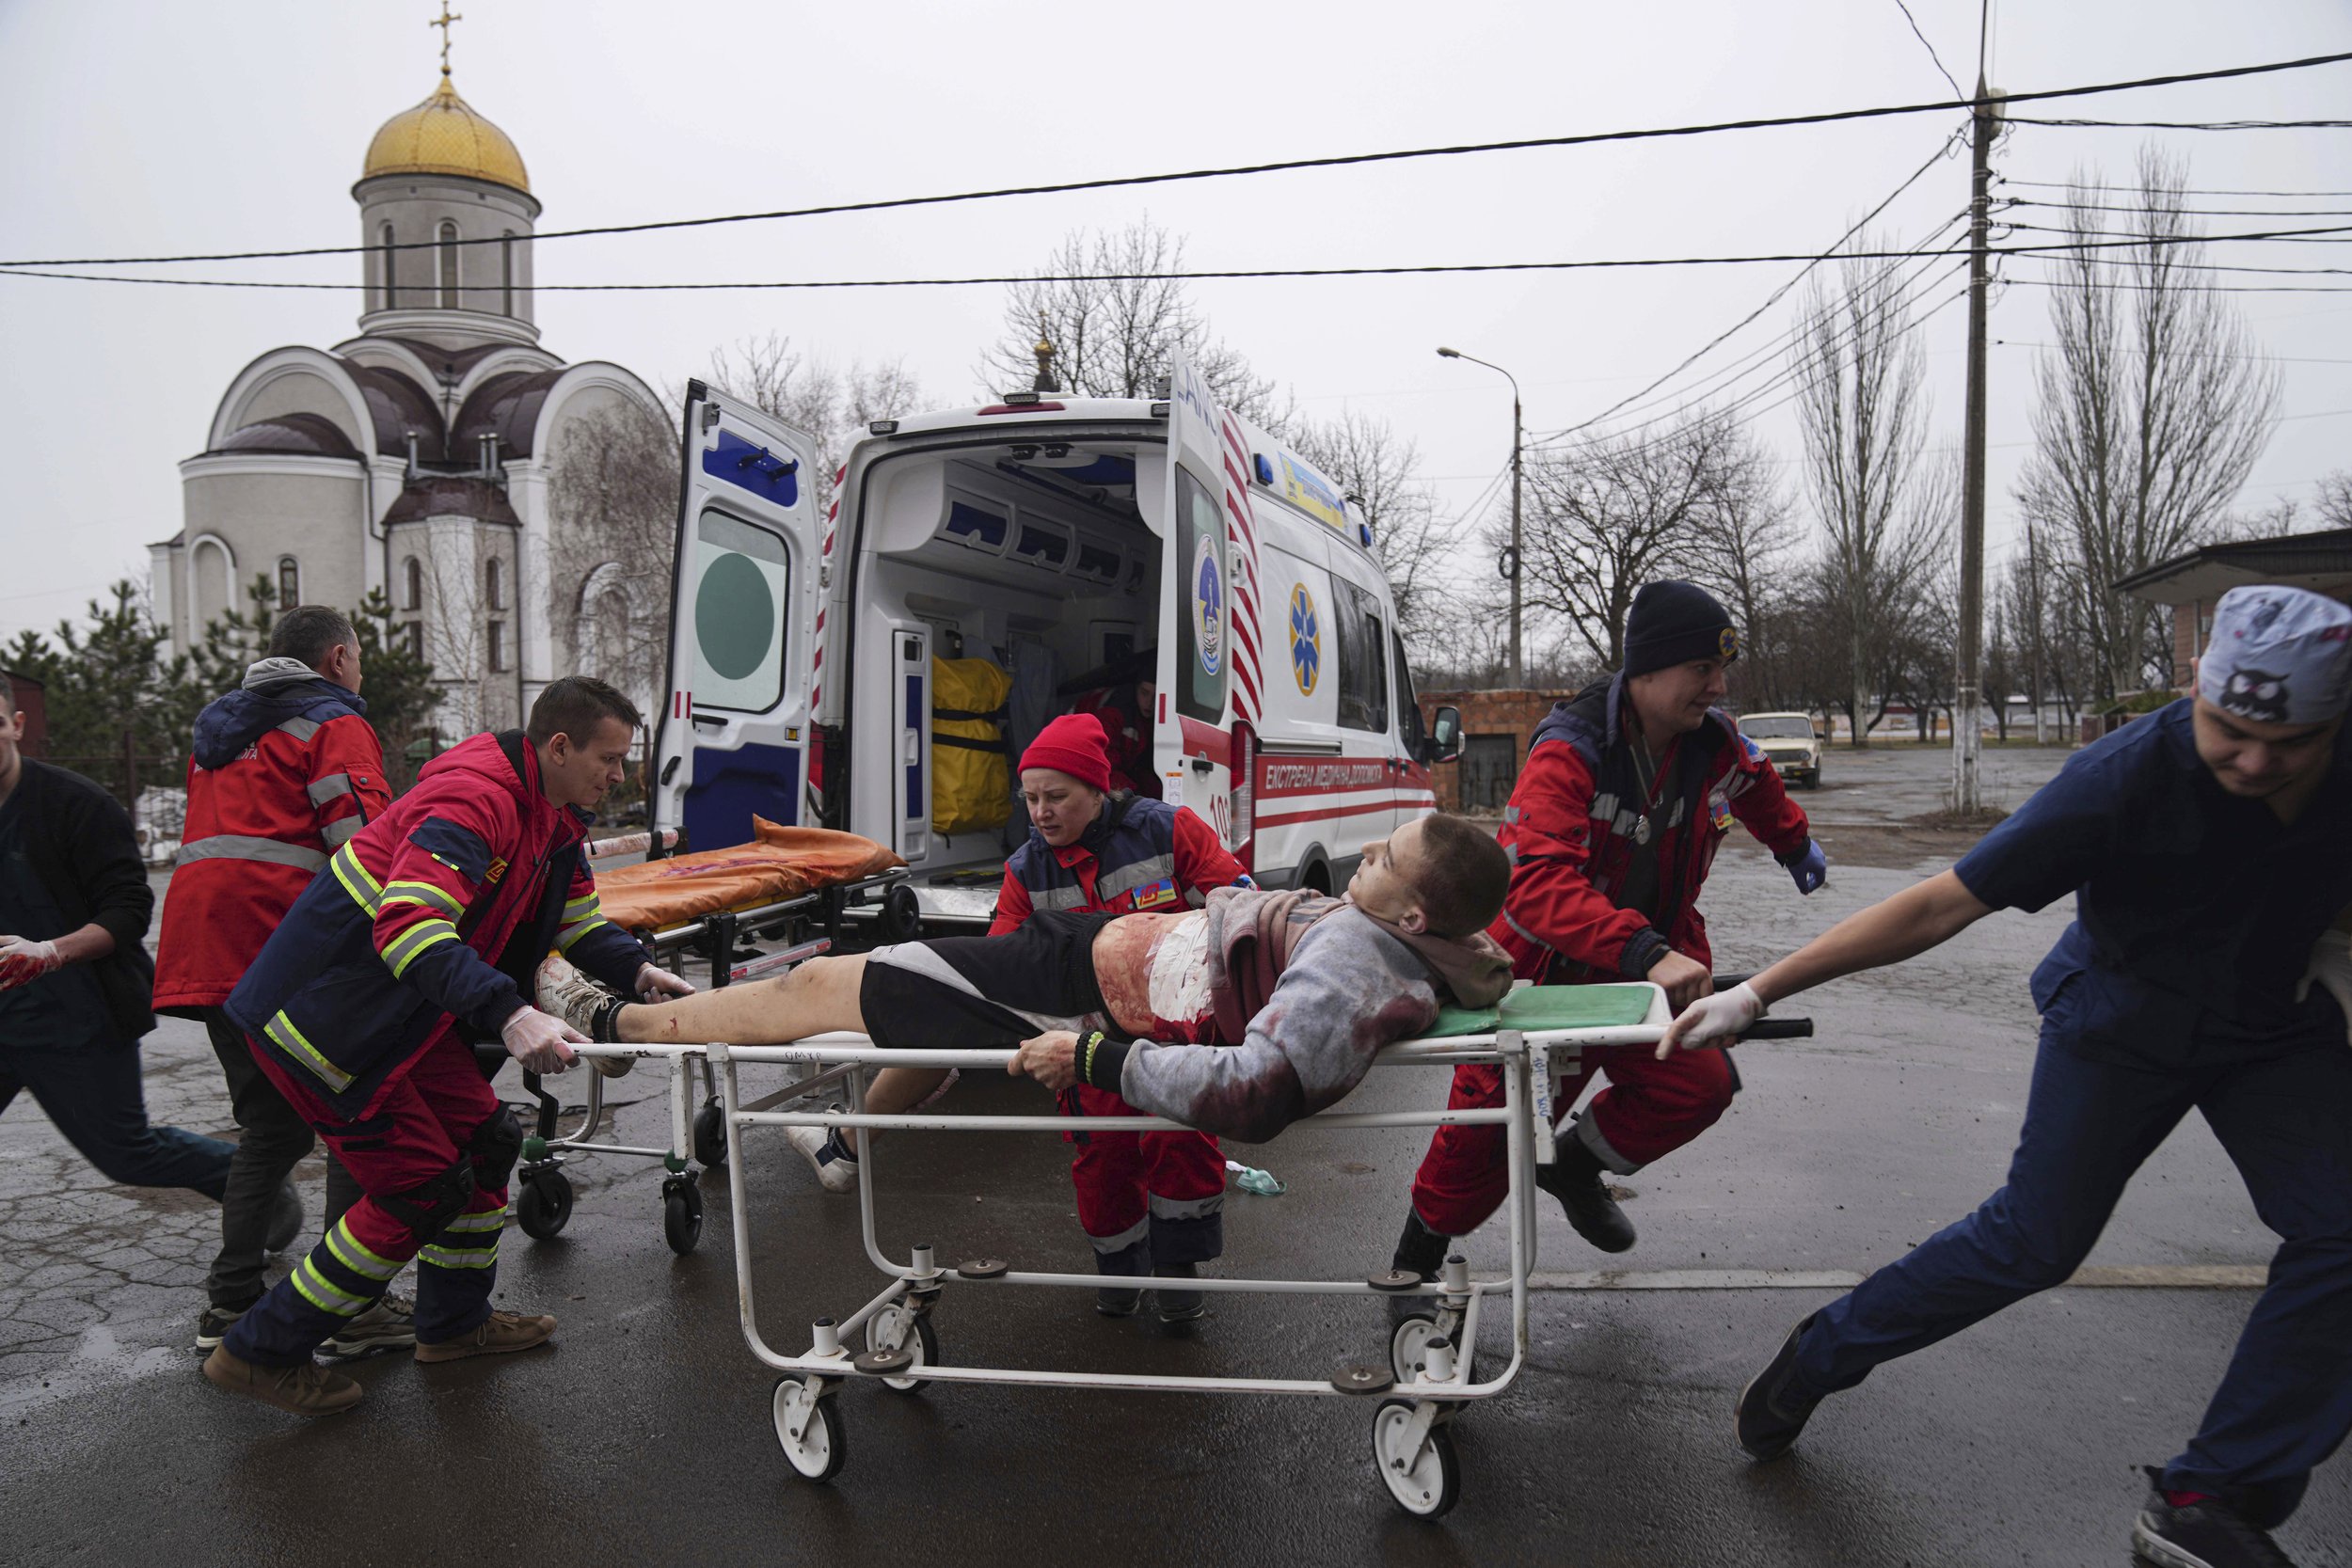  Ambulance paramedics move an injured man on a stretcher, wounded by shelling in a residential area, at a maternity hospital converted into a medical ward and used as a bomb shelter in Mariupol, Ukraine, Tuesday, March 1, 2022. (AP Photo/Evgeniy Malo